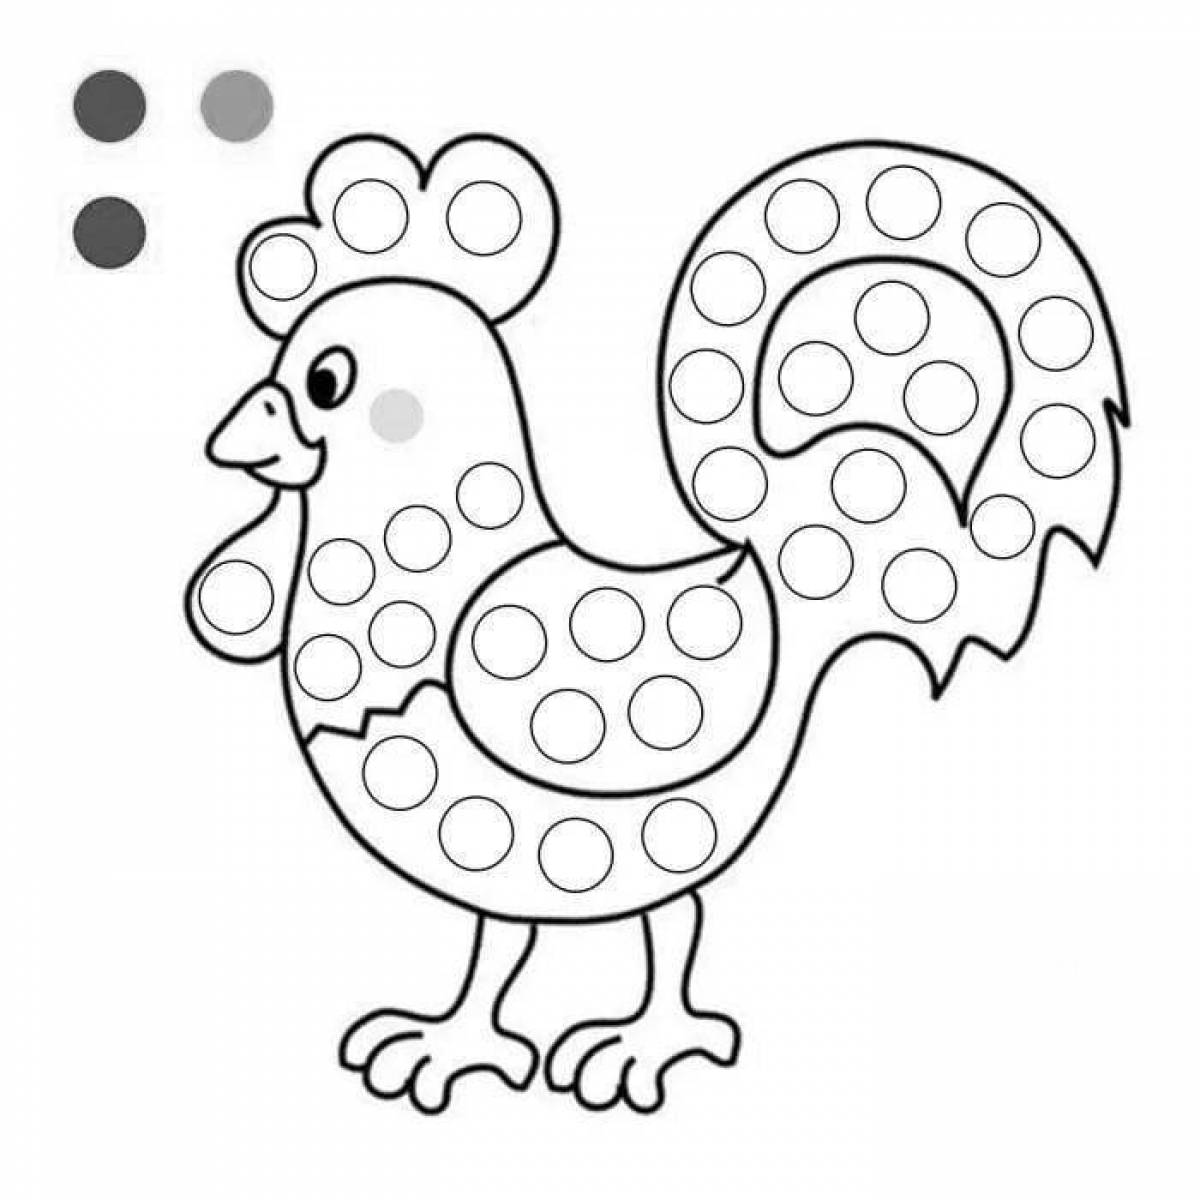 Fun coloring templates for kids